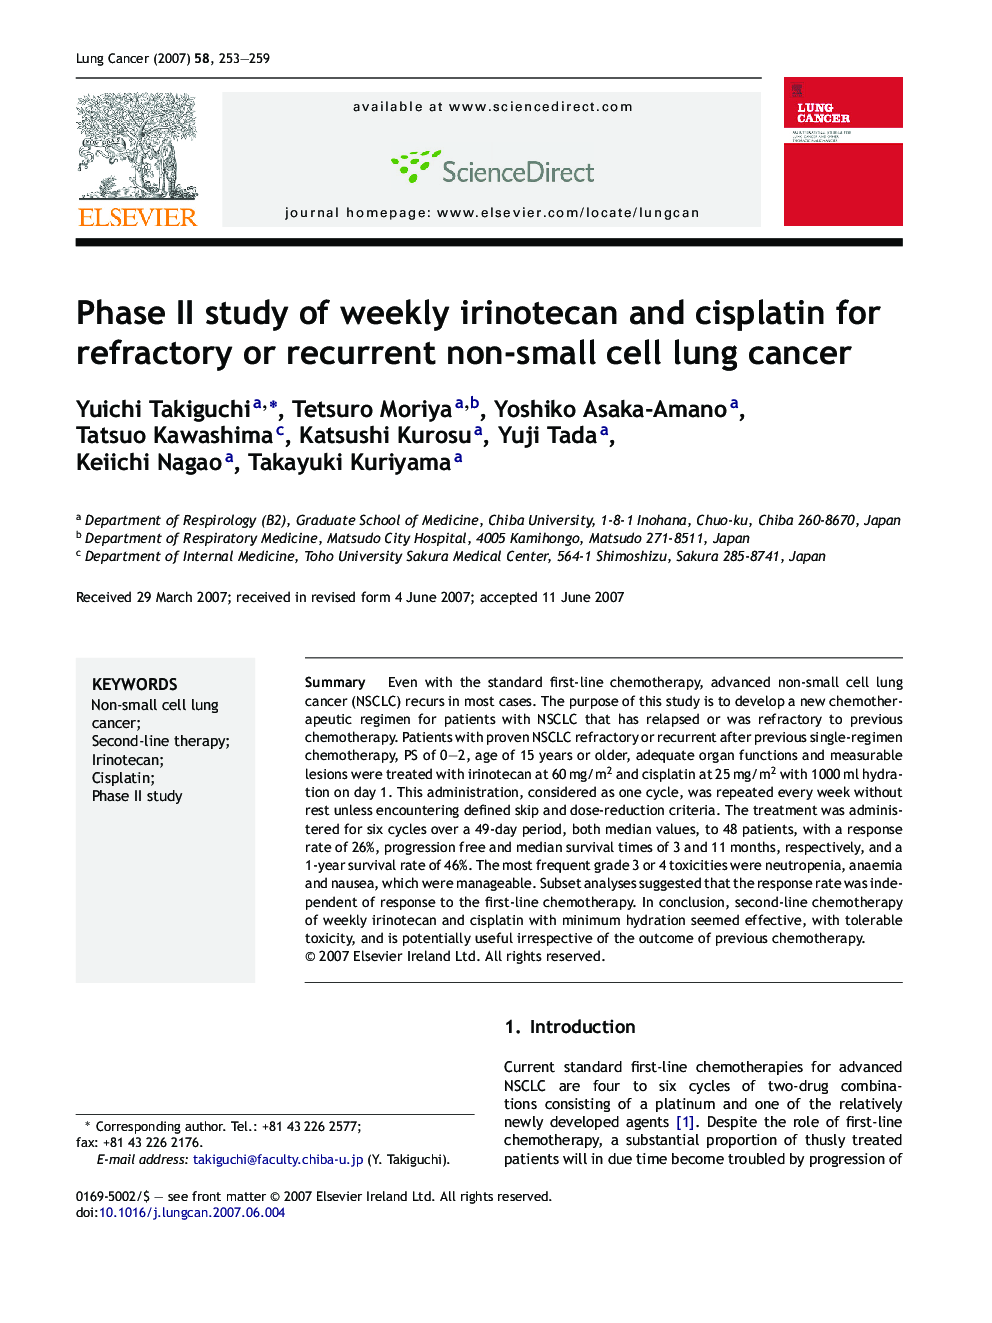 Phase II study of weekly irinotecan and cisplatin for refractory or recurrent non-small cell lung cancer